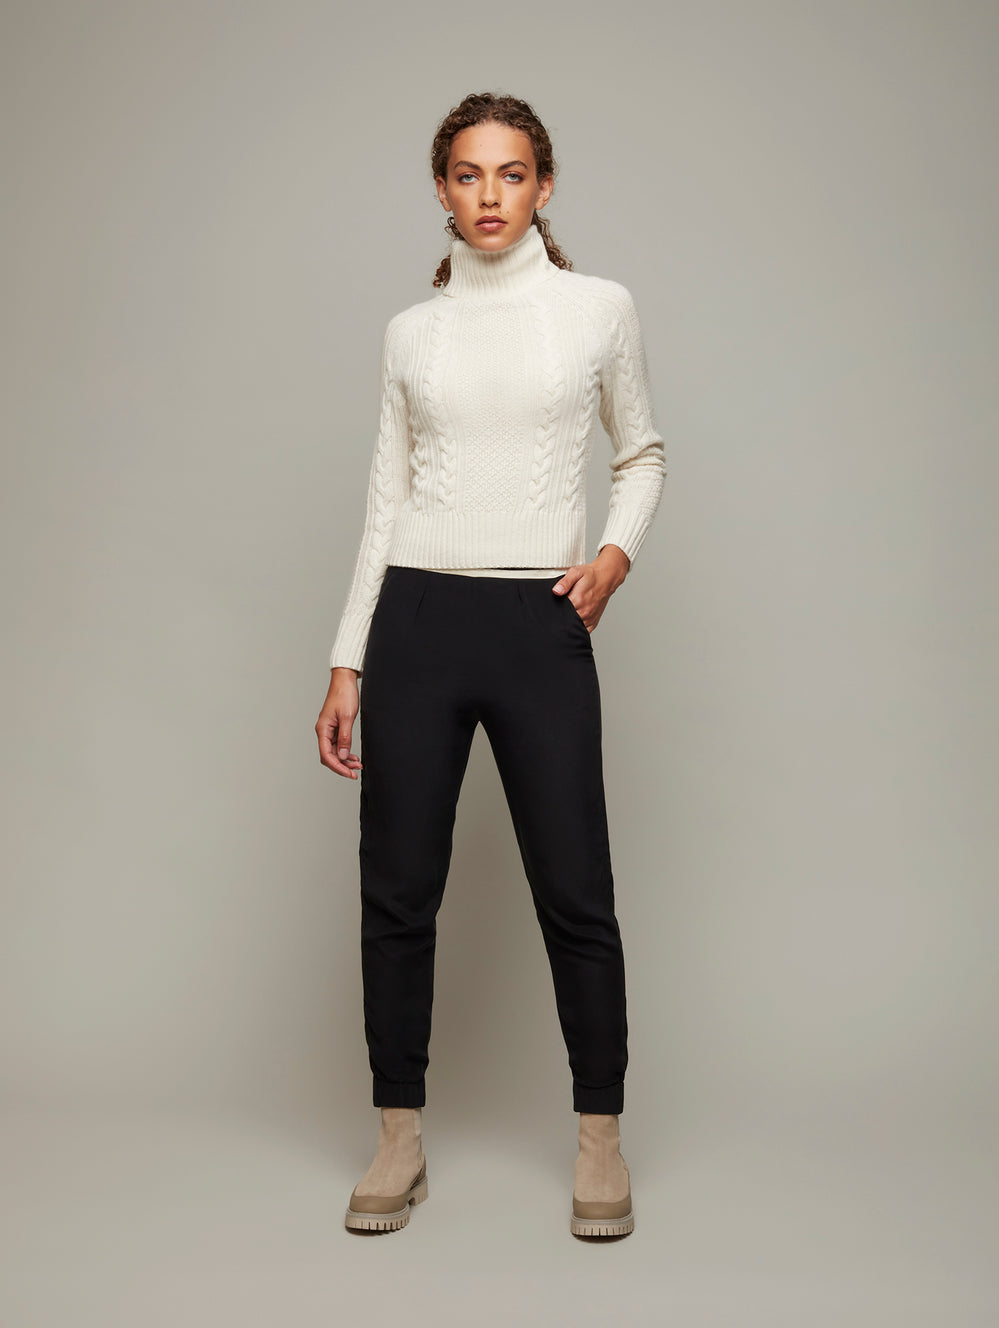 DEPLOY womenswear cream white cashmere cable knit turtleneck jumper front view